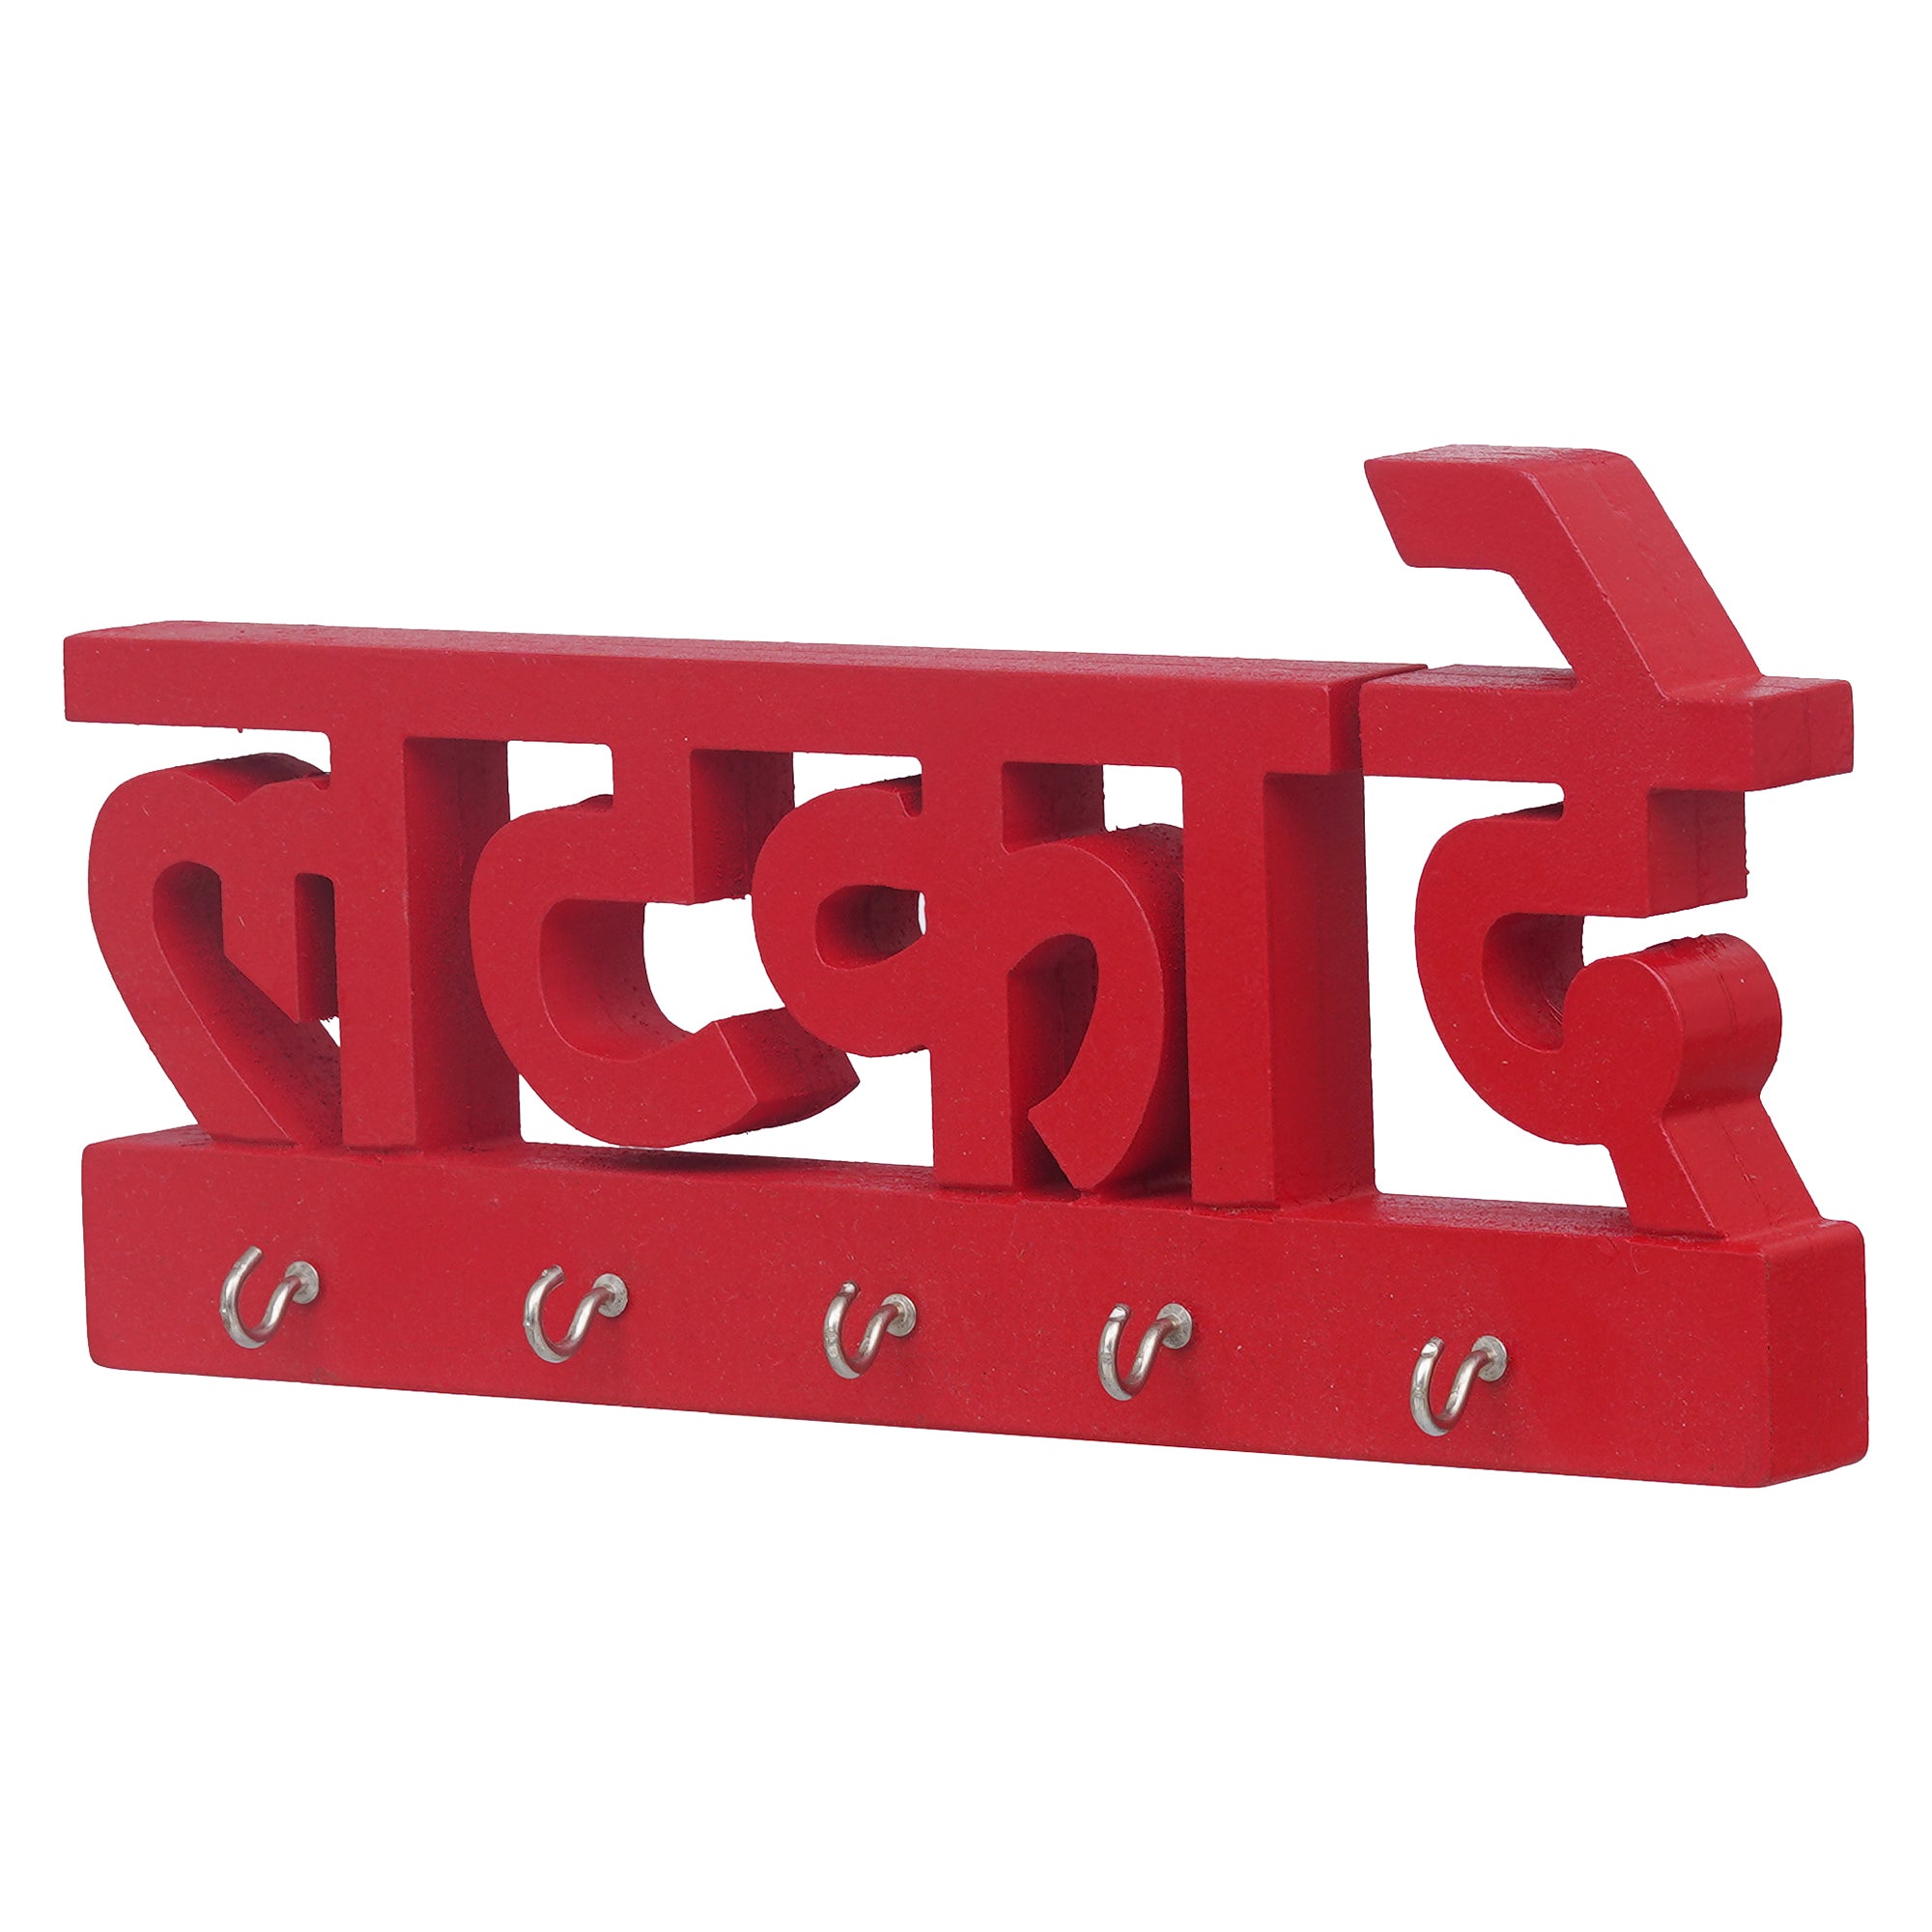 eCraftIndia Red "Latka De" Decorative Wooden Cutout Key Holder with 3 Key Hooks For Wall 7